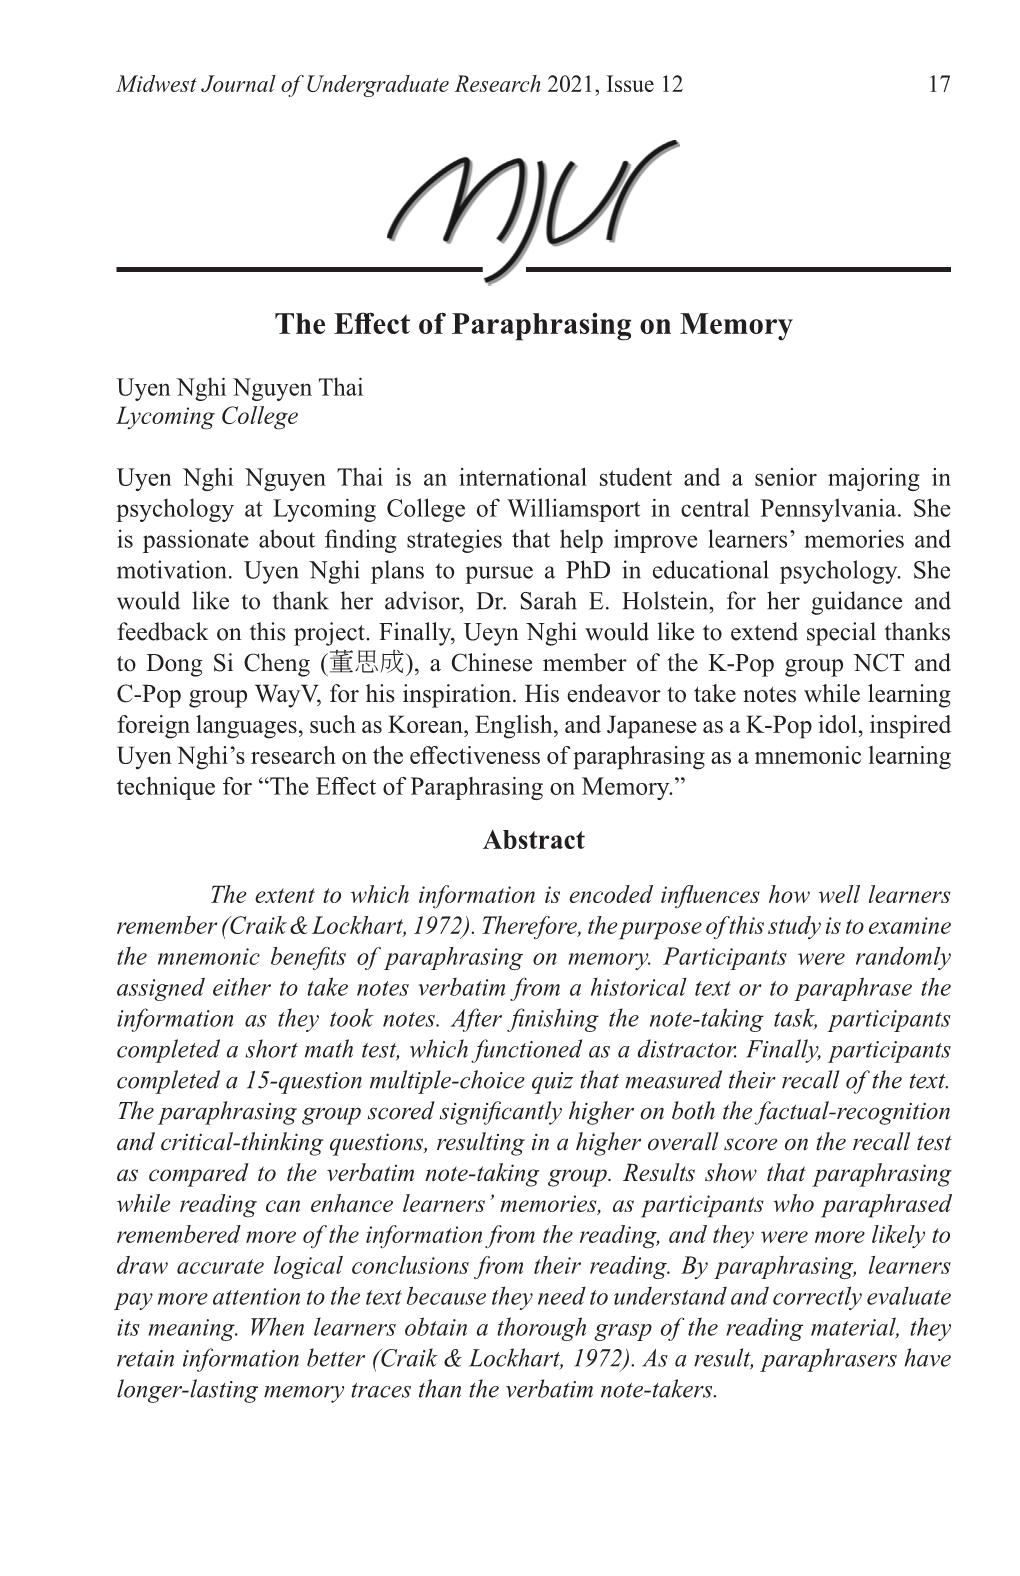 The Effect of Paraphrasing on Memory